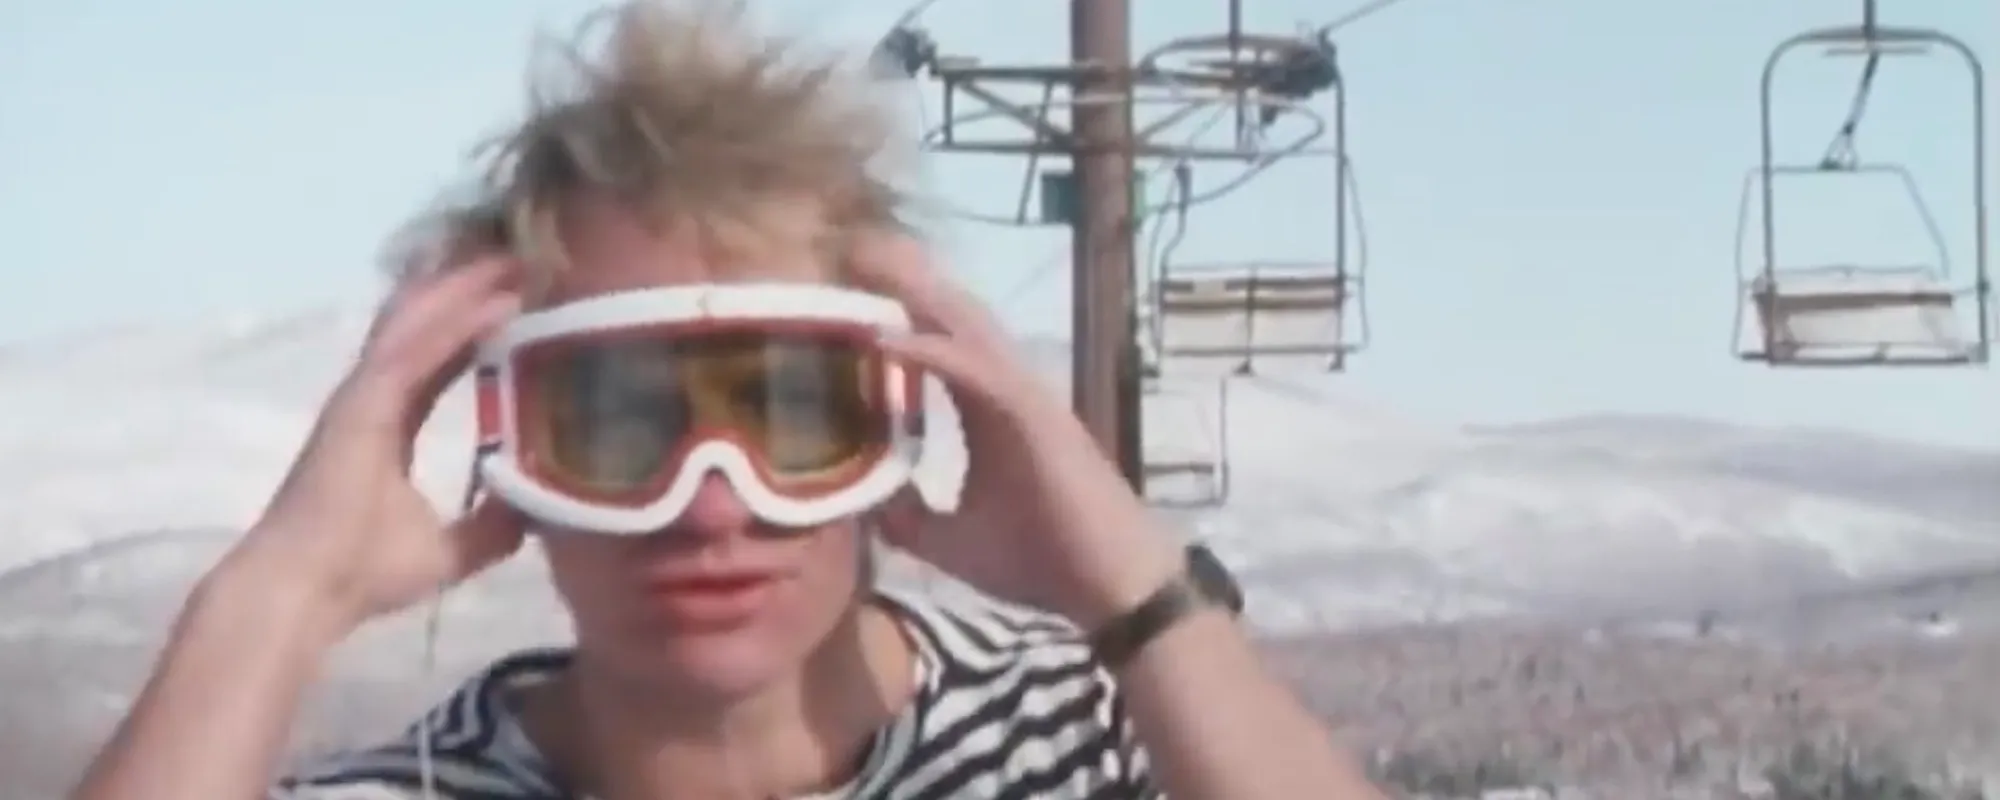 The Police Unearth Never-Before-Seen 1980 Christmas Video of “Don’t Stand So Close to Me”